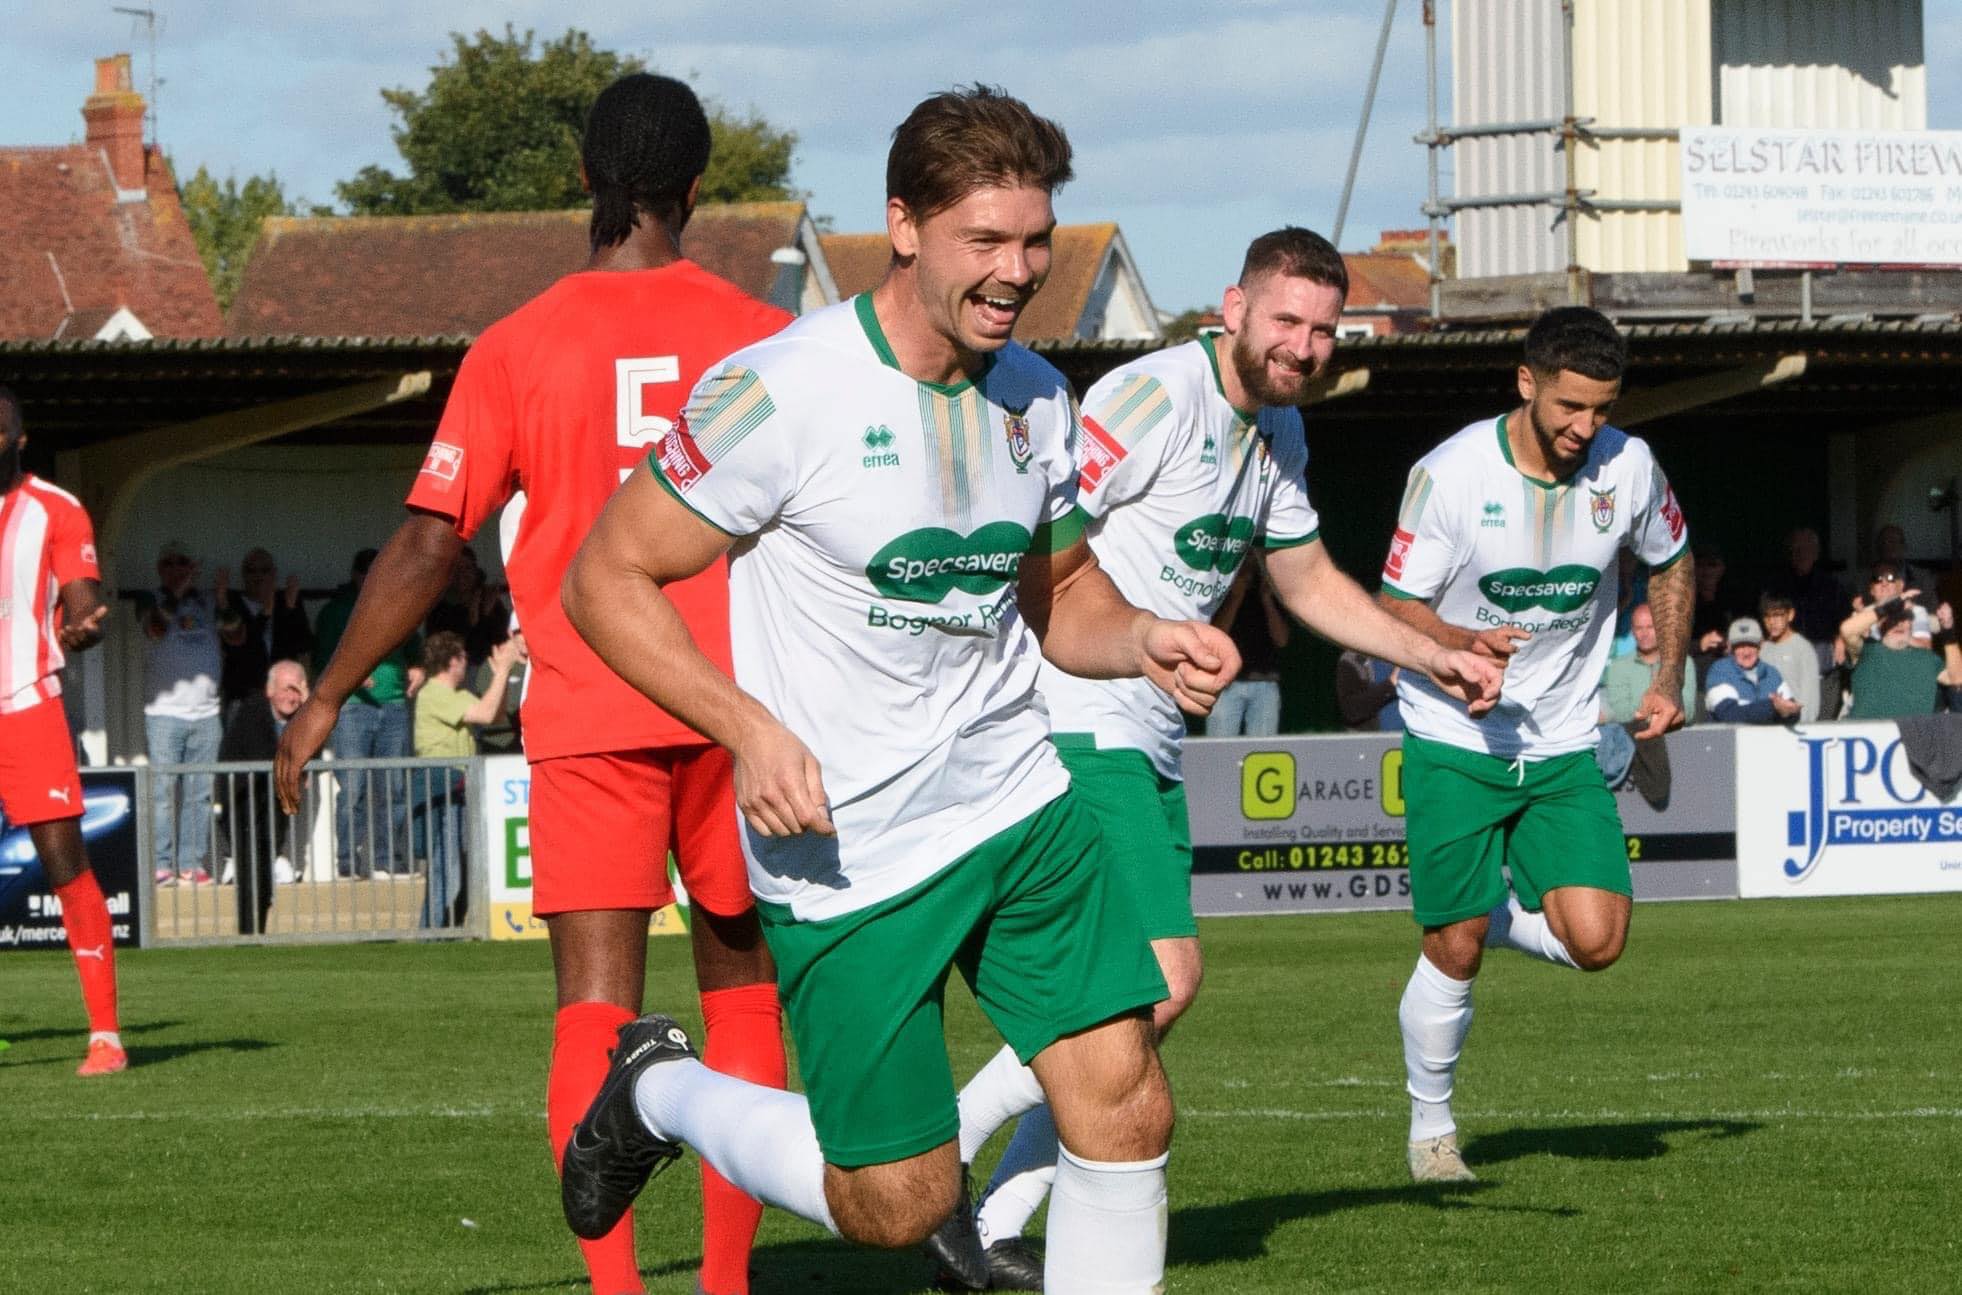 The ultimate guide to match day at Bognor Regis FC